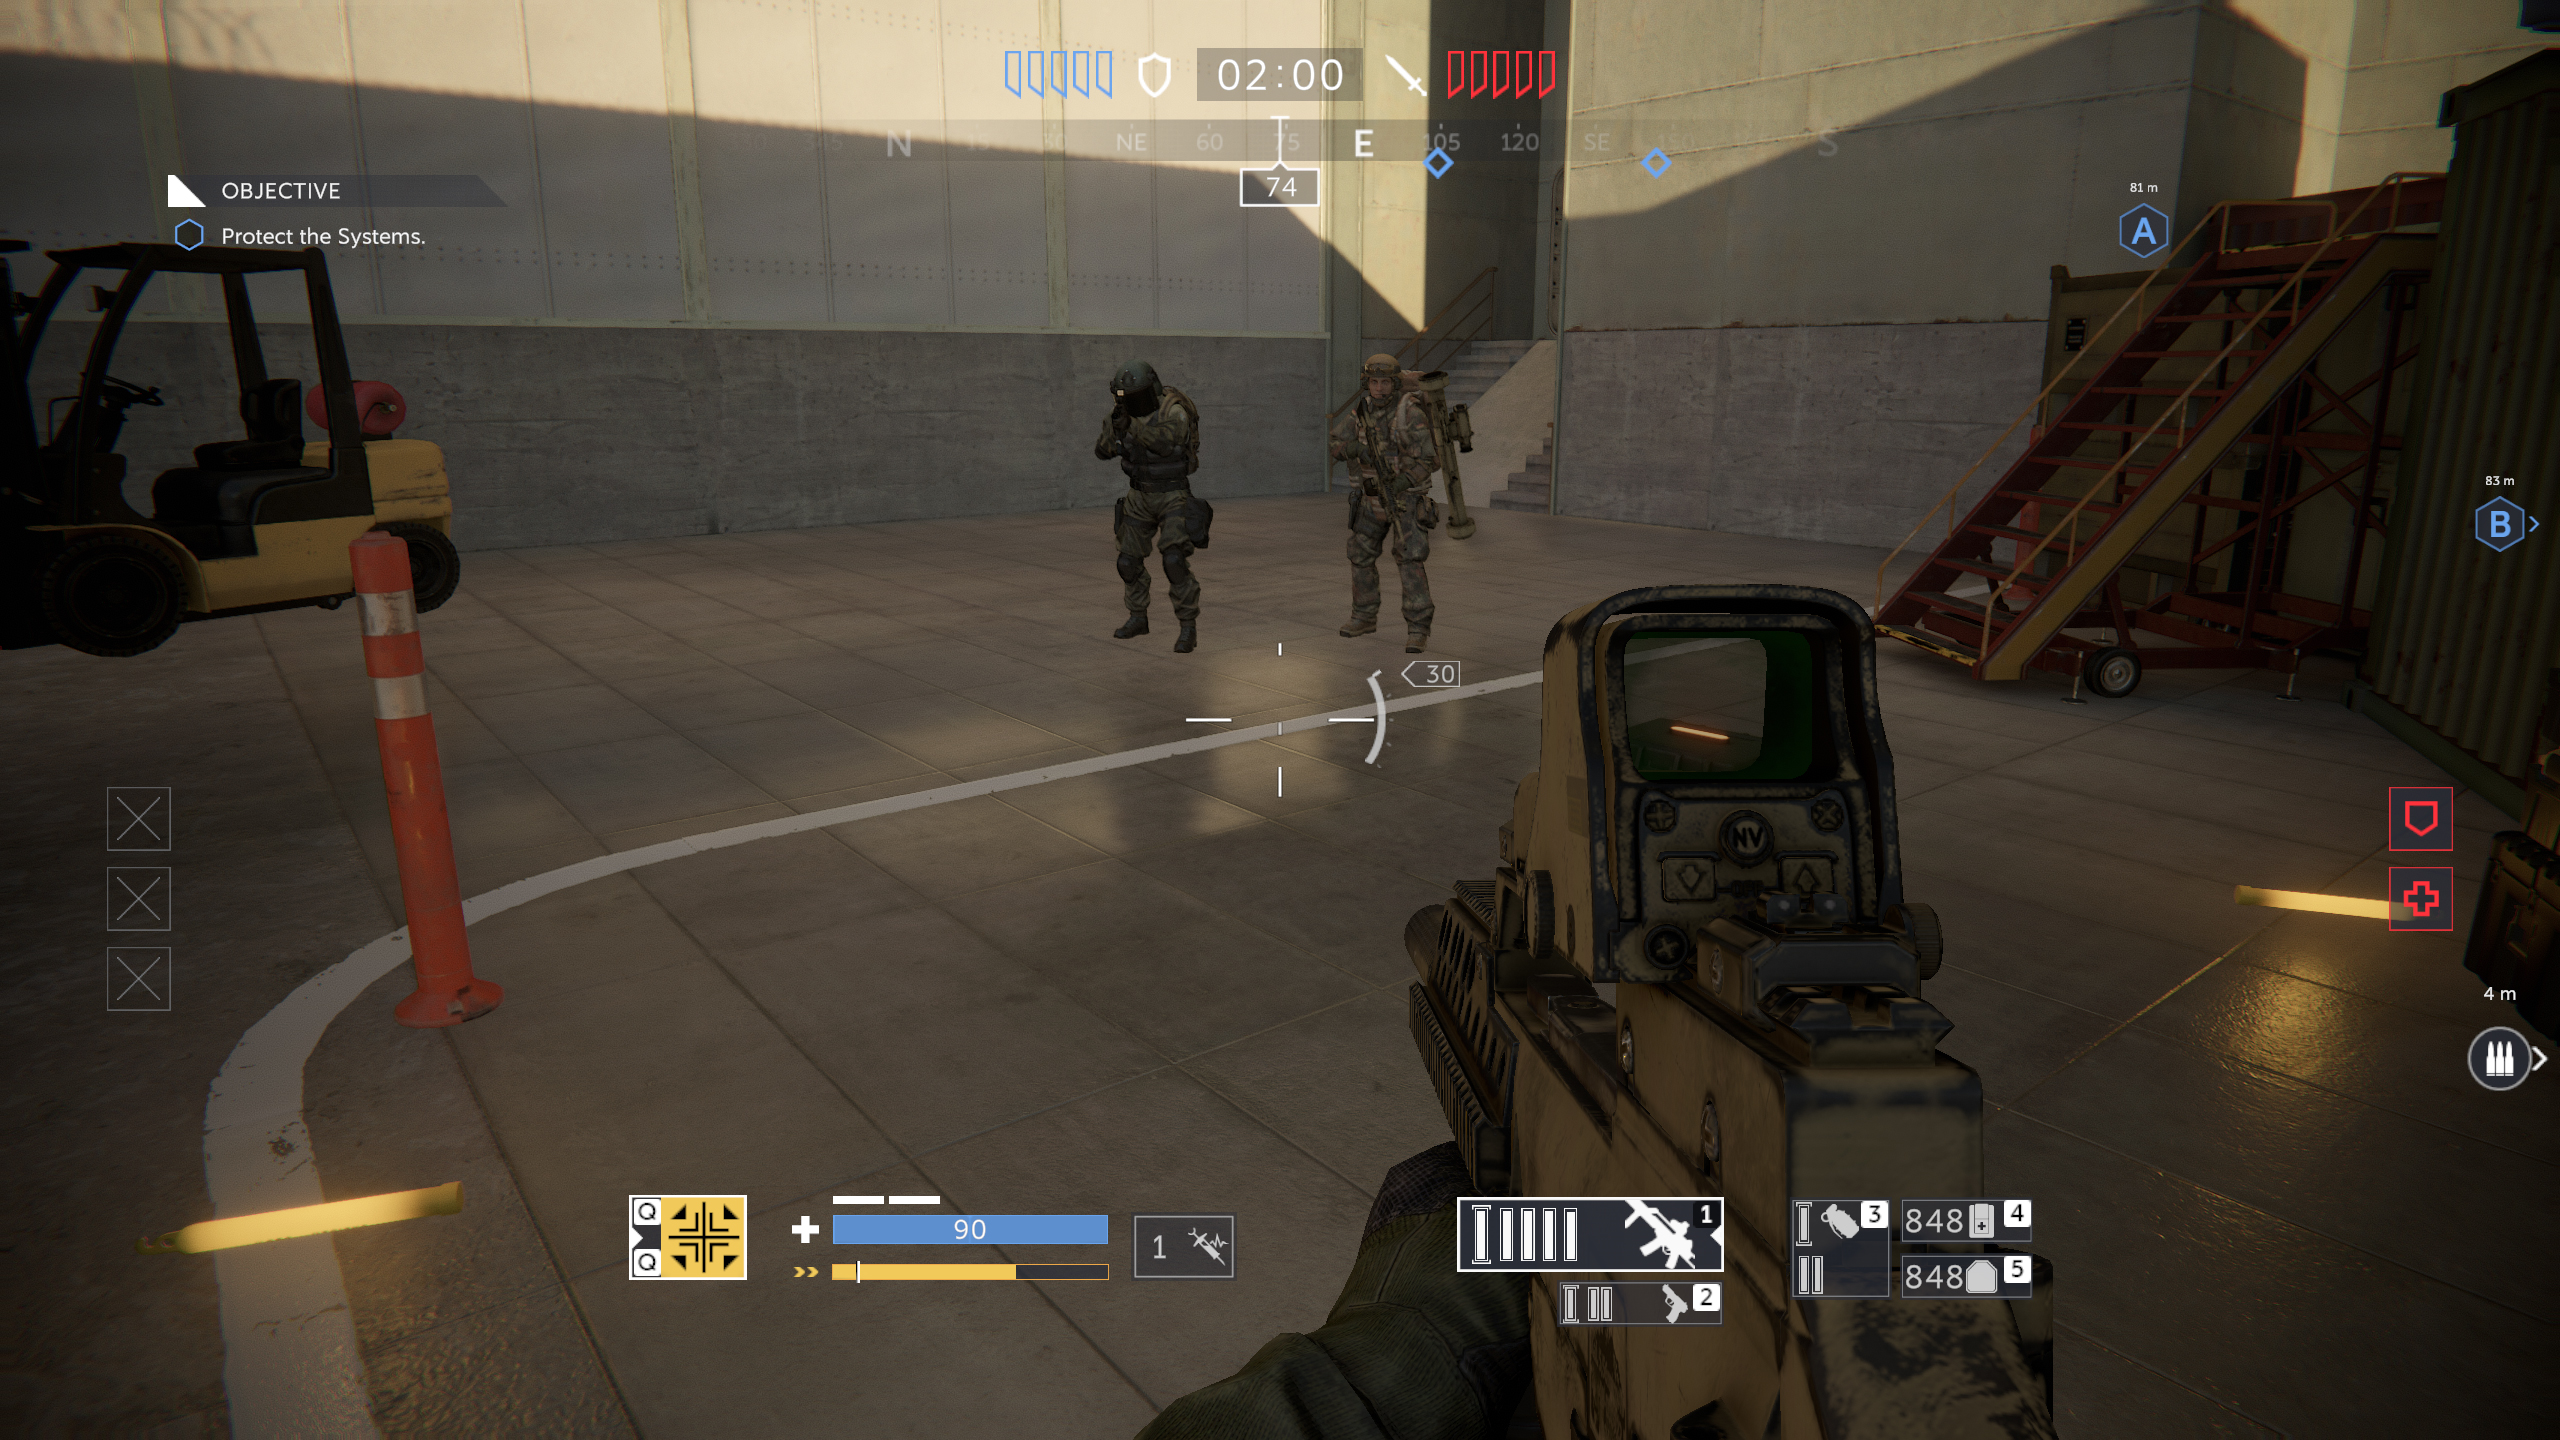 While your crosshair does not point at the enemy, no indication is displayed.